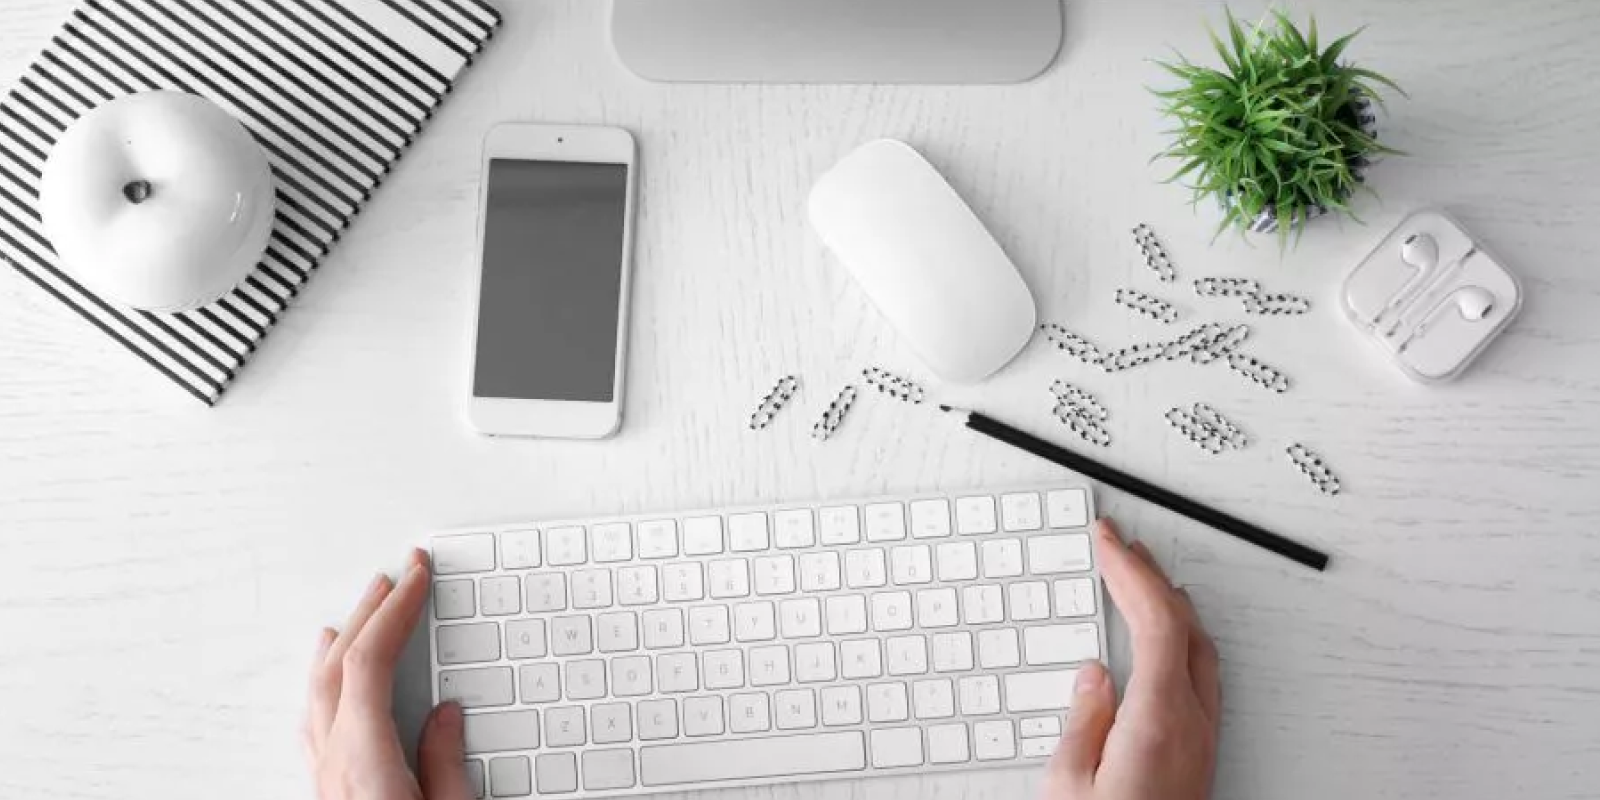 A white desktop featuring an array of Apple products including an iPhone, a keyboard, a mouse, headphones and monochrome paperclips with a green plant